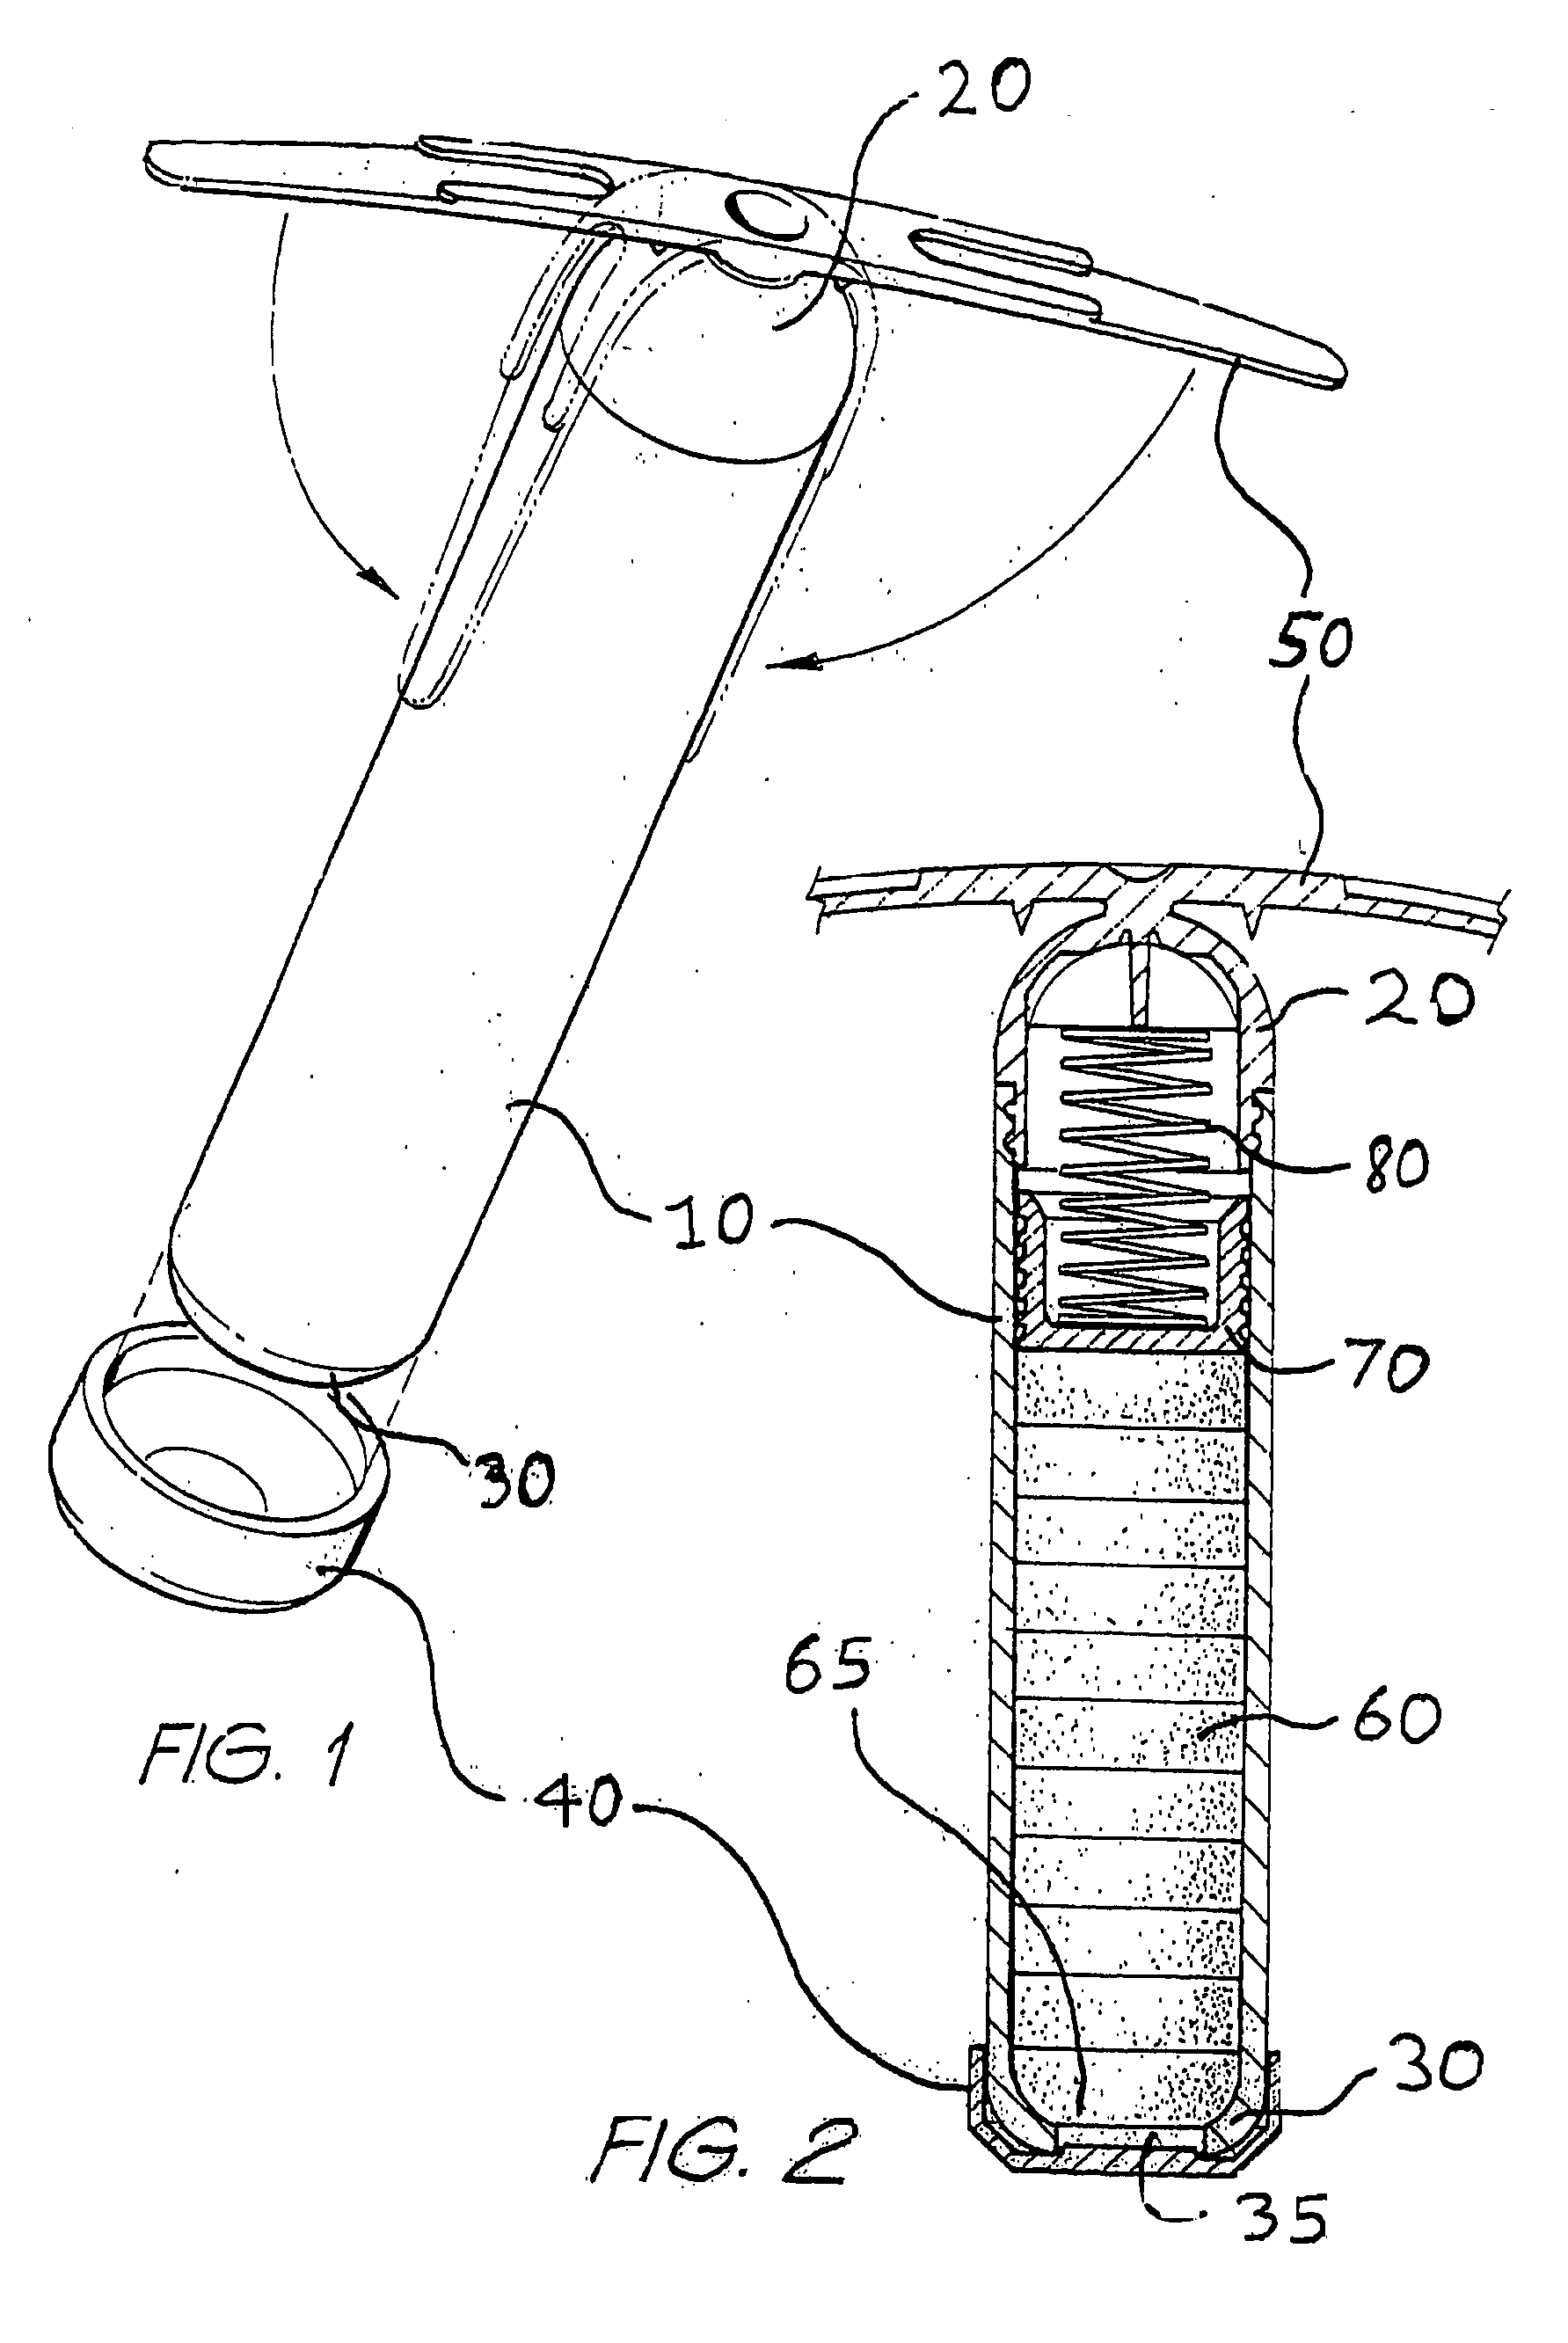 Dosage form, device, and methods of treatment